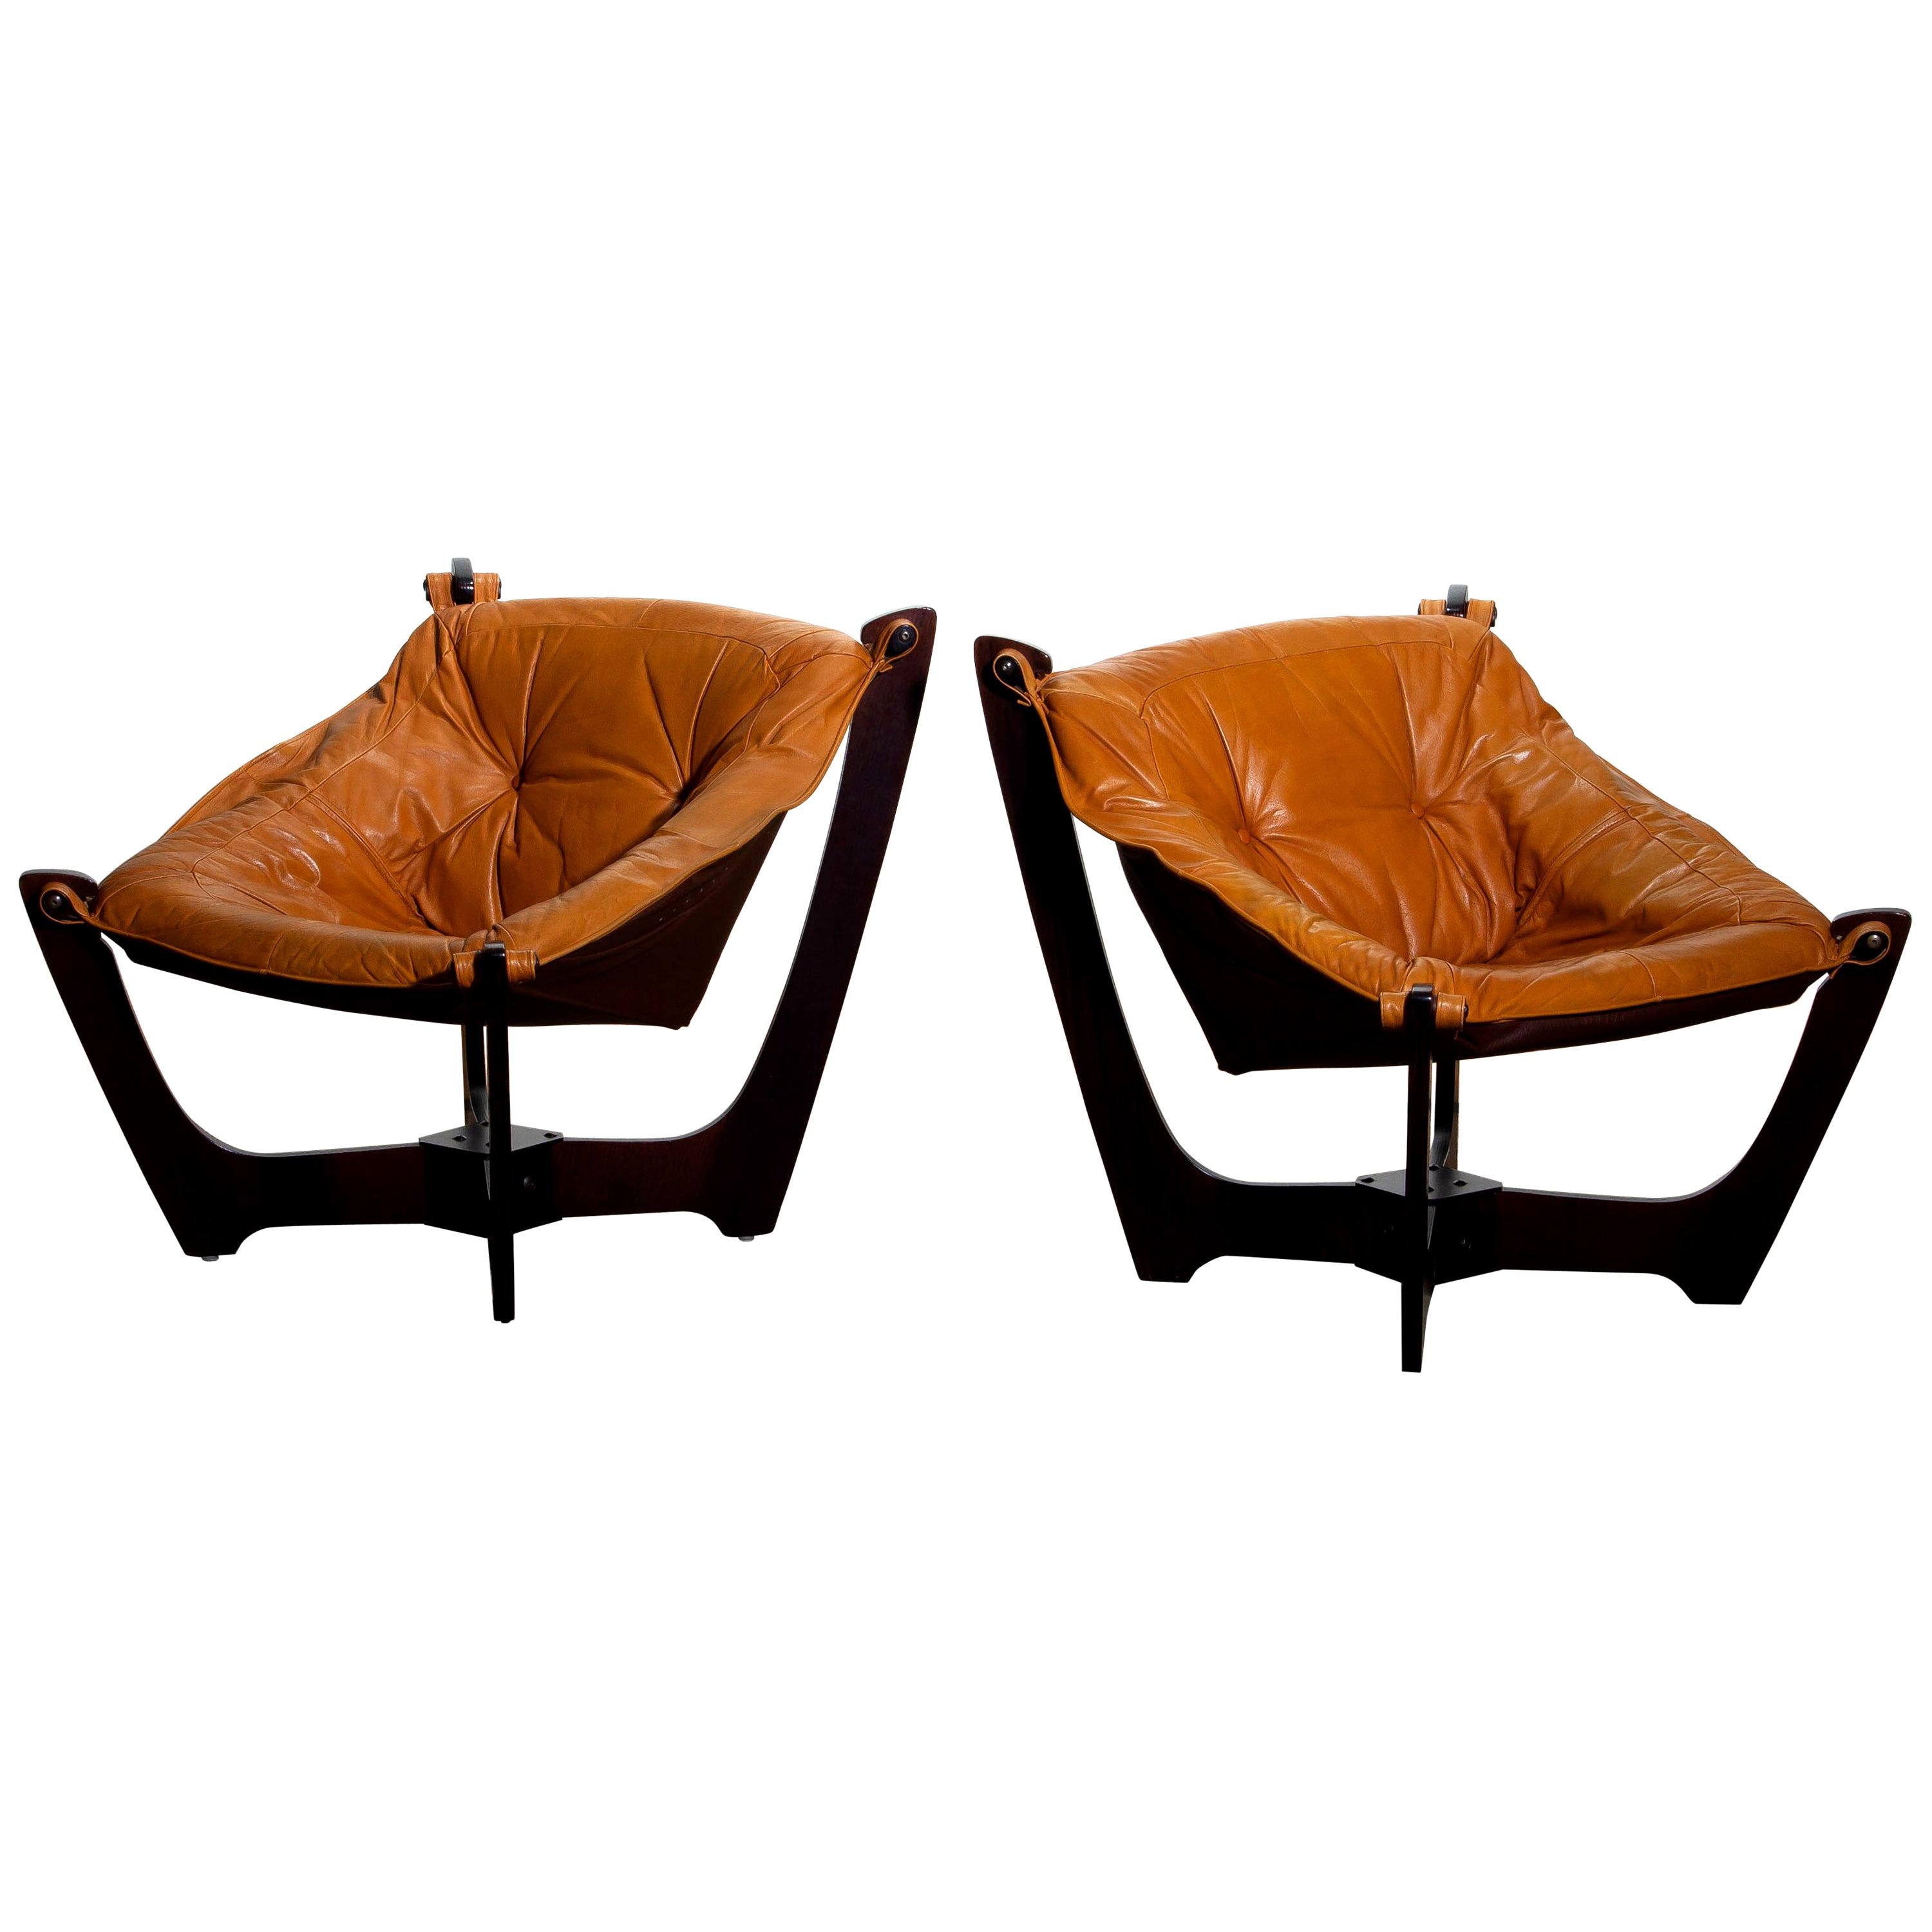 1970 Pair of Leather Lounge Chairs by Odd Knutsen for Hjellegjerde Møbler Norway 1